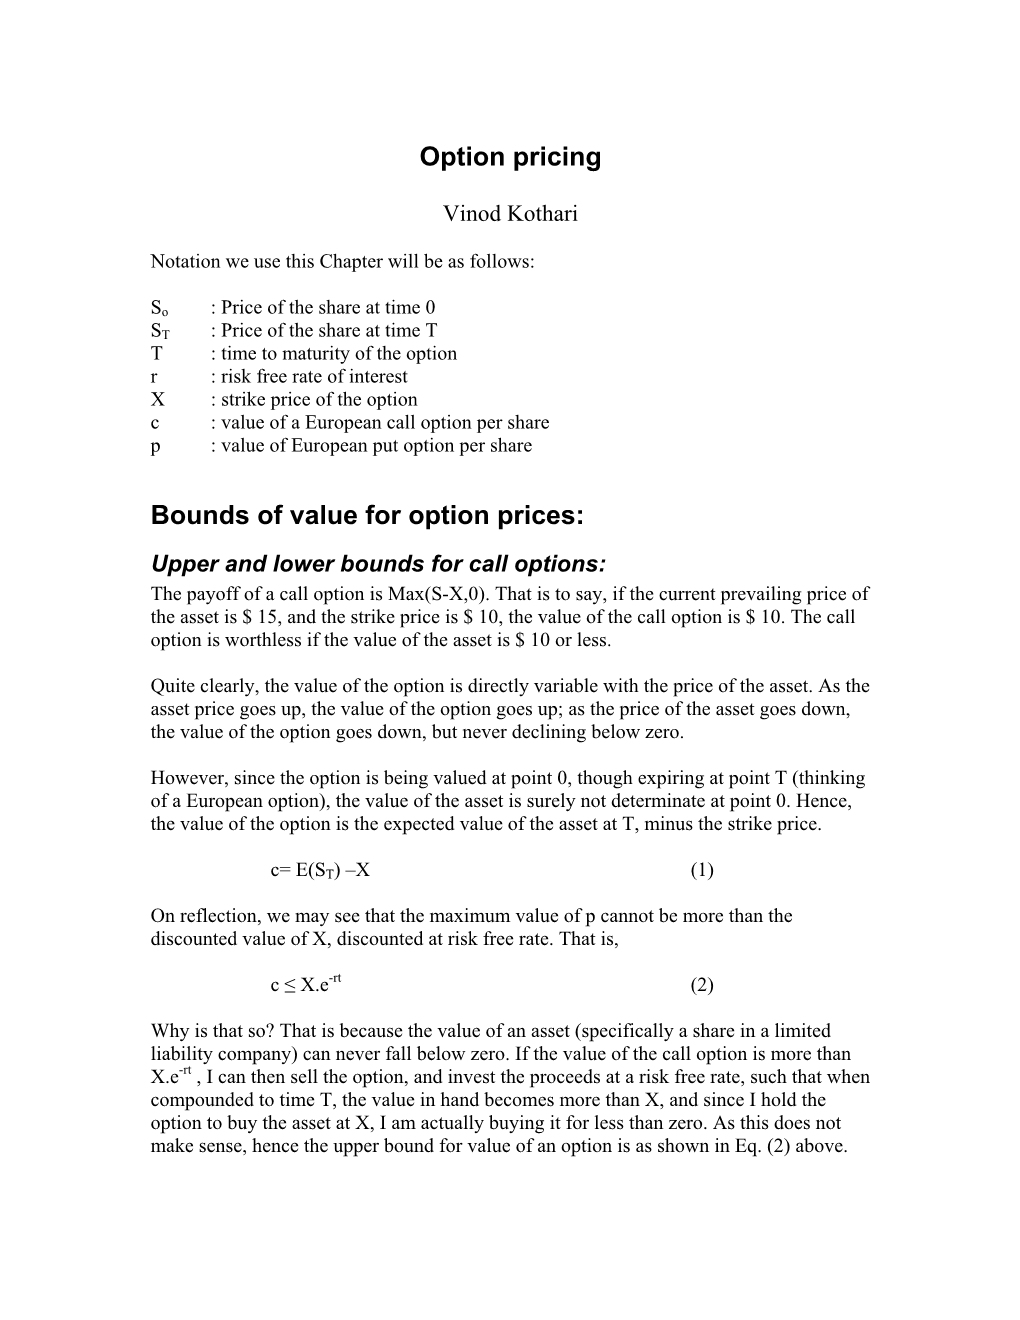 Option Pricing Bounds of Value for Option Prices